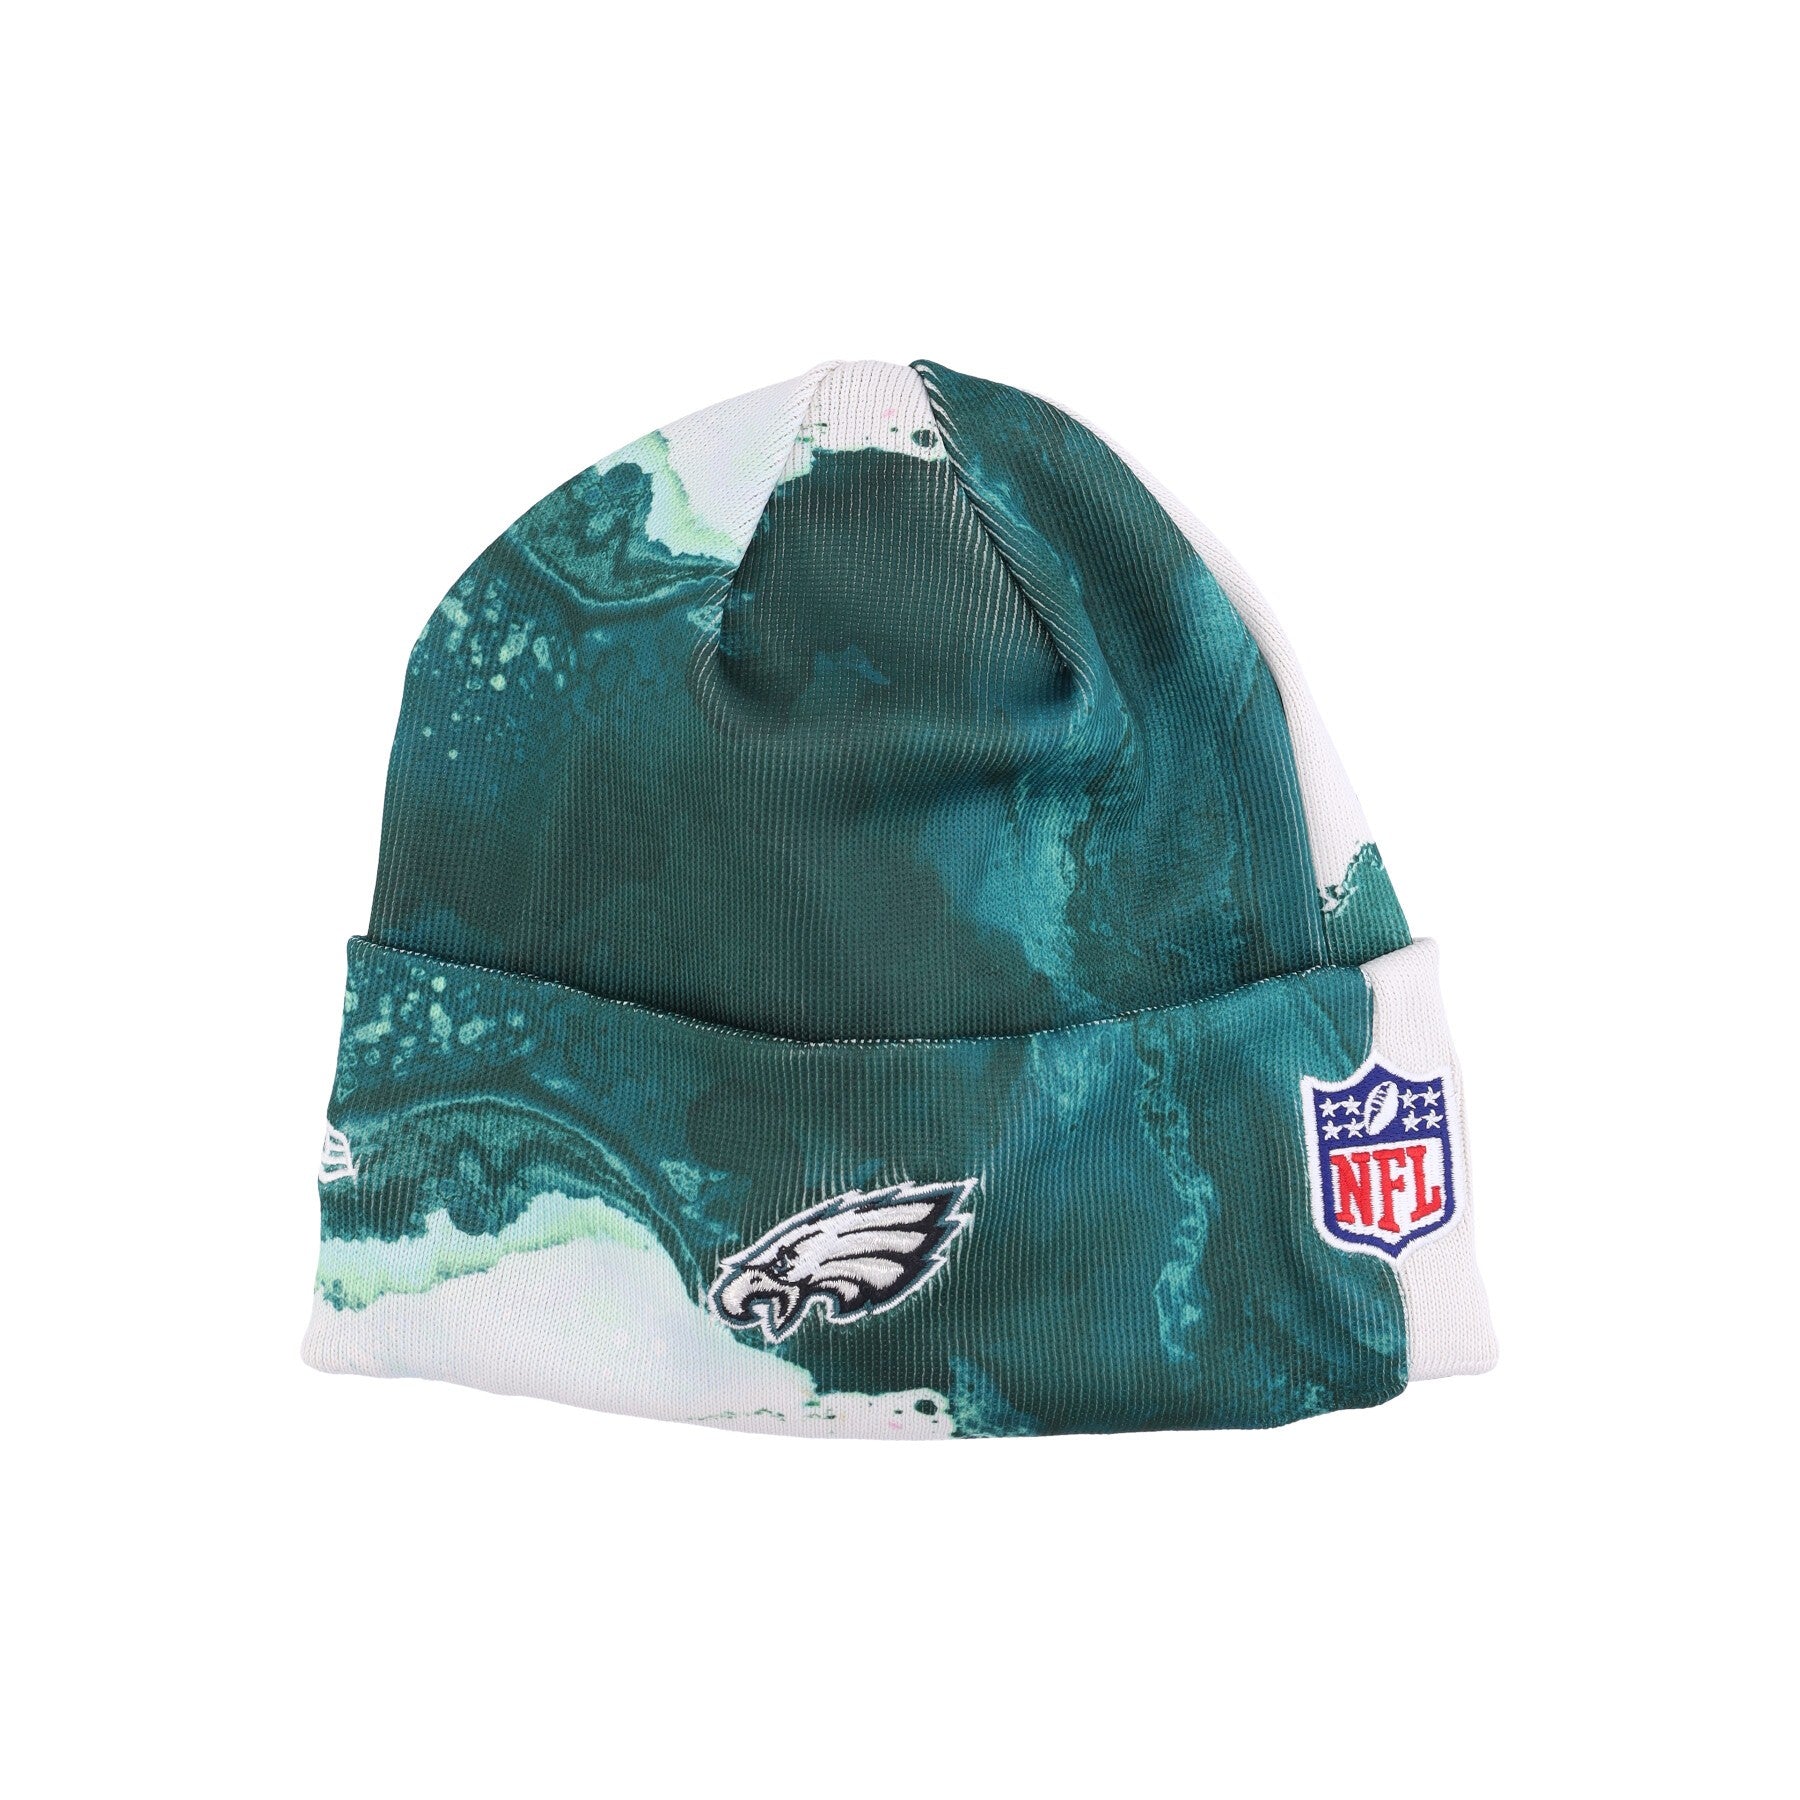 New Era, Cappello Uomo Nfl Sideline Ink Knit Phieag, 